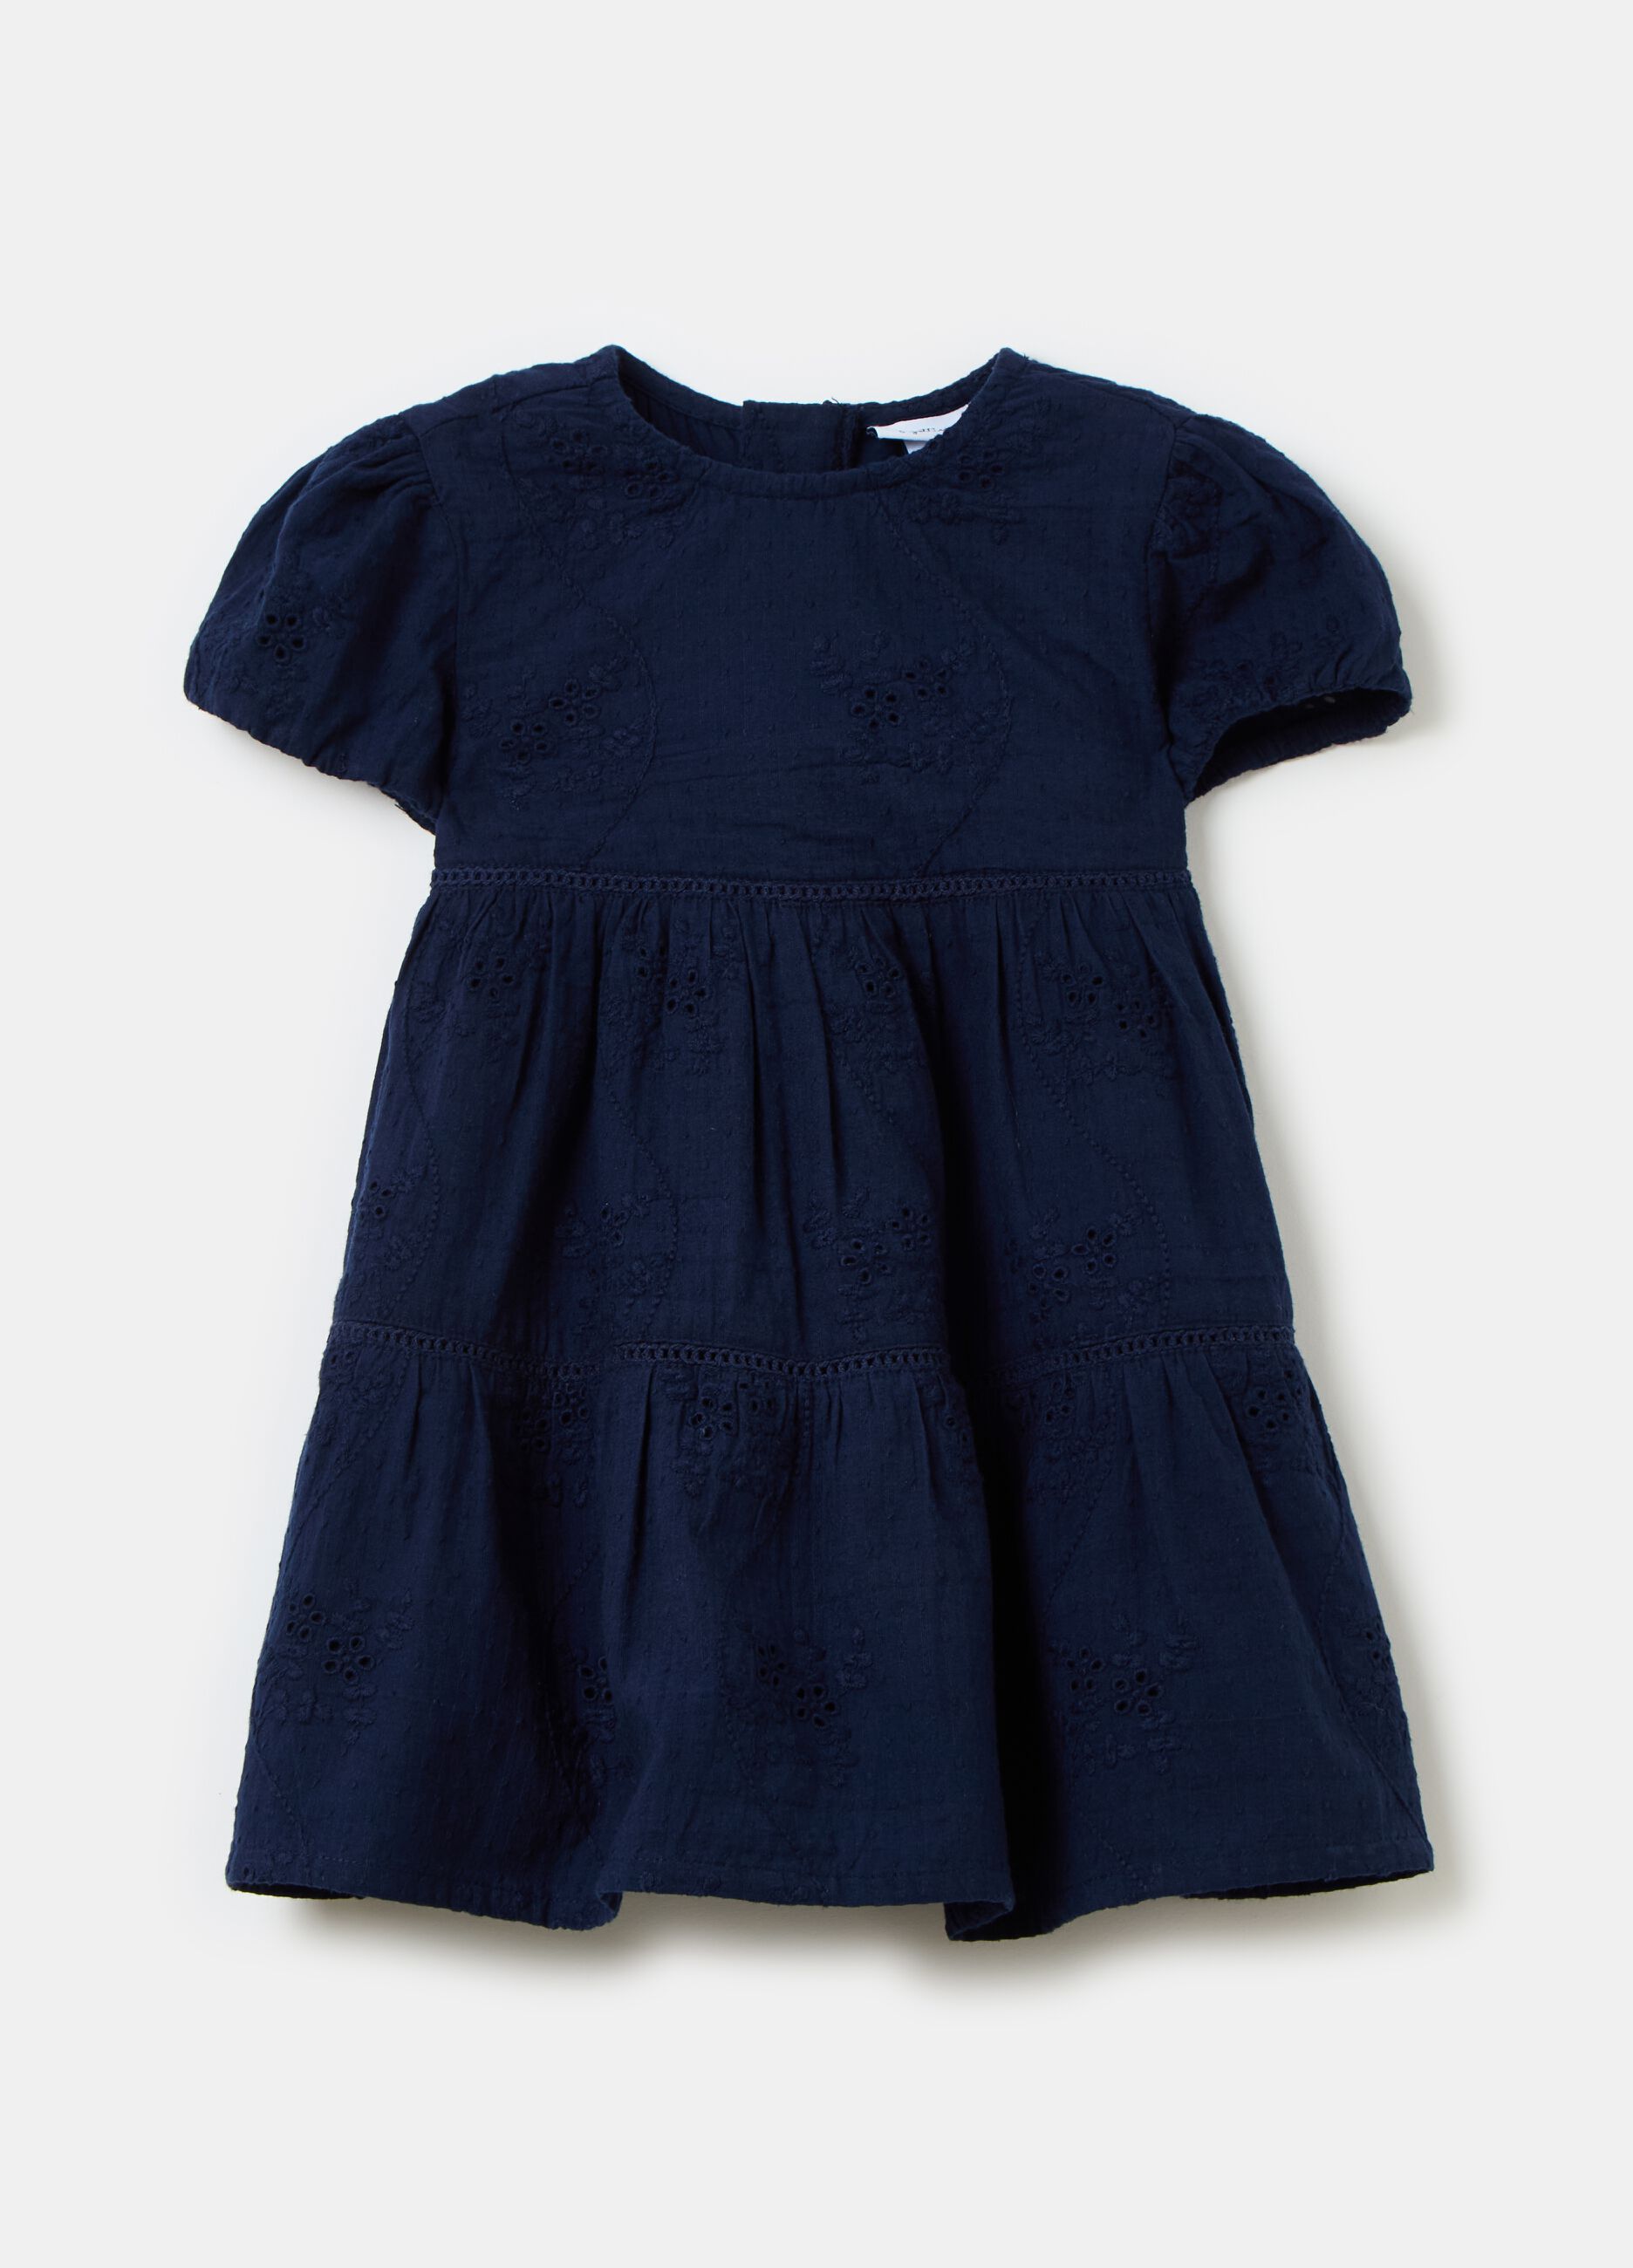 Tiered dress in cotton broderie anglaise